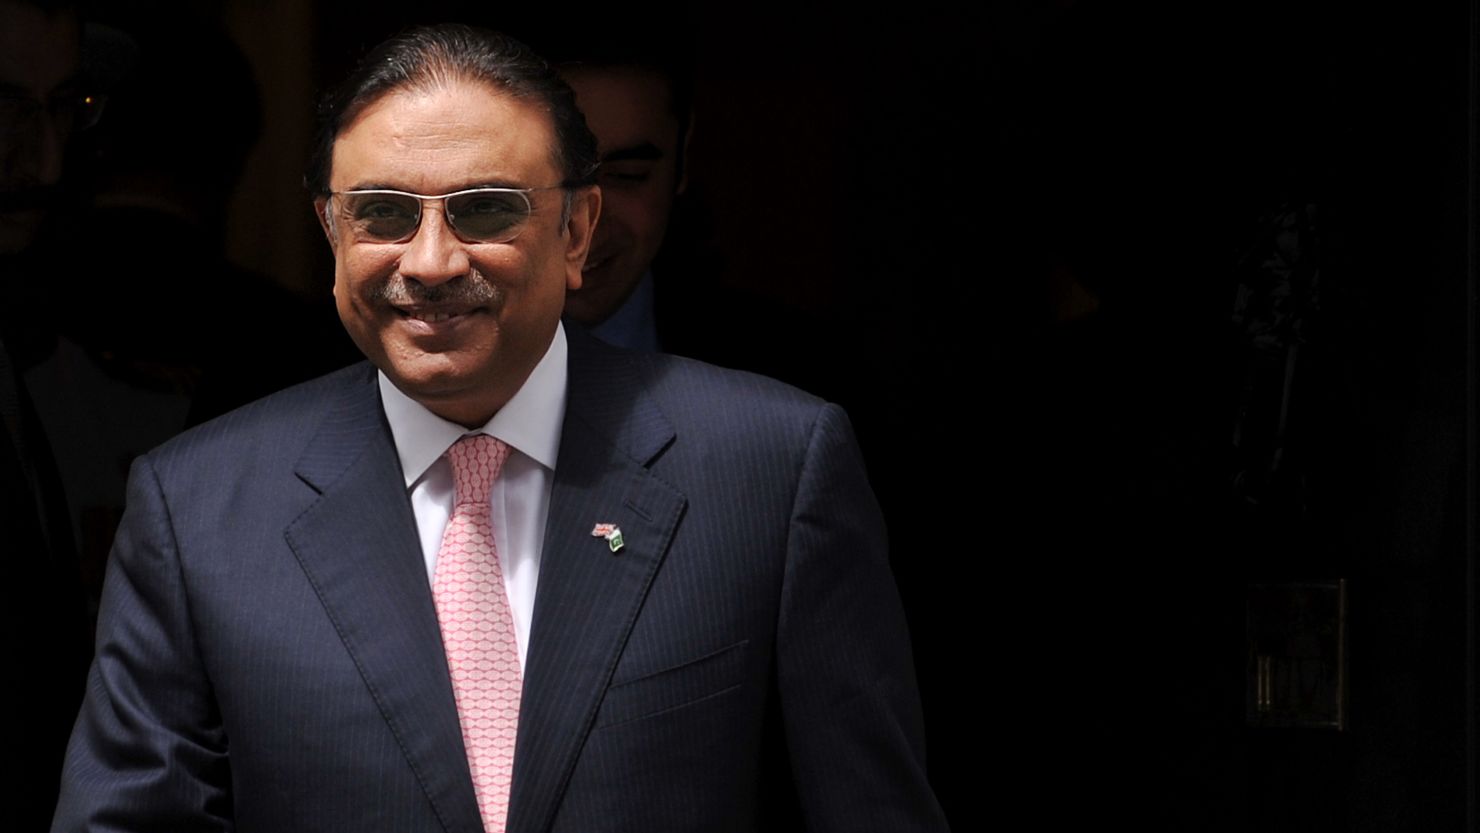  This picture taken on July 1, 2011 shows Pakistani President Asif Ali Zardari leaving 10 Downing Street in central London.